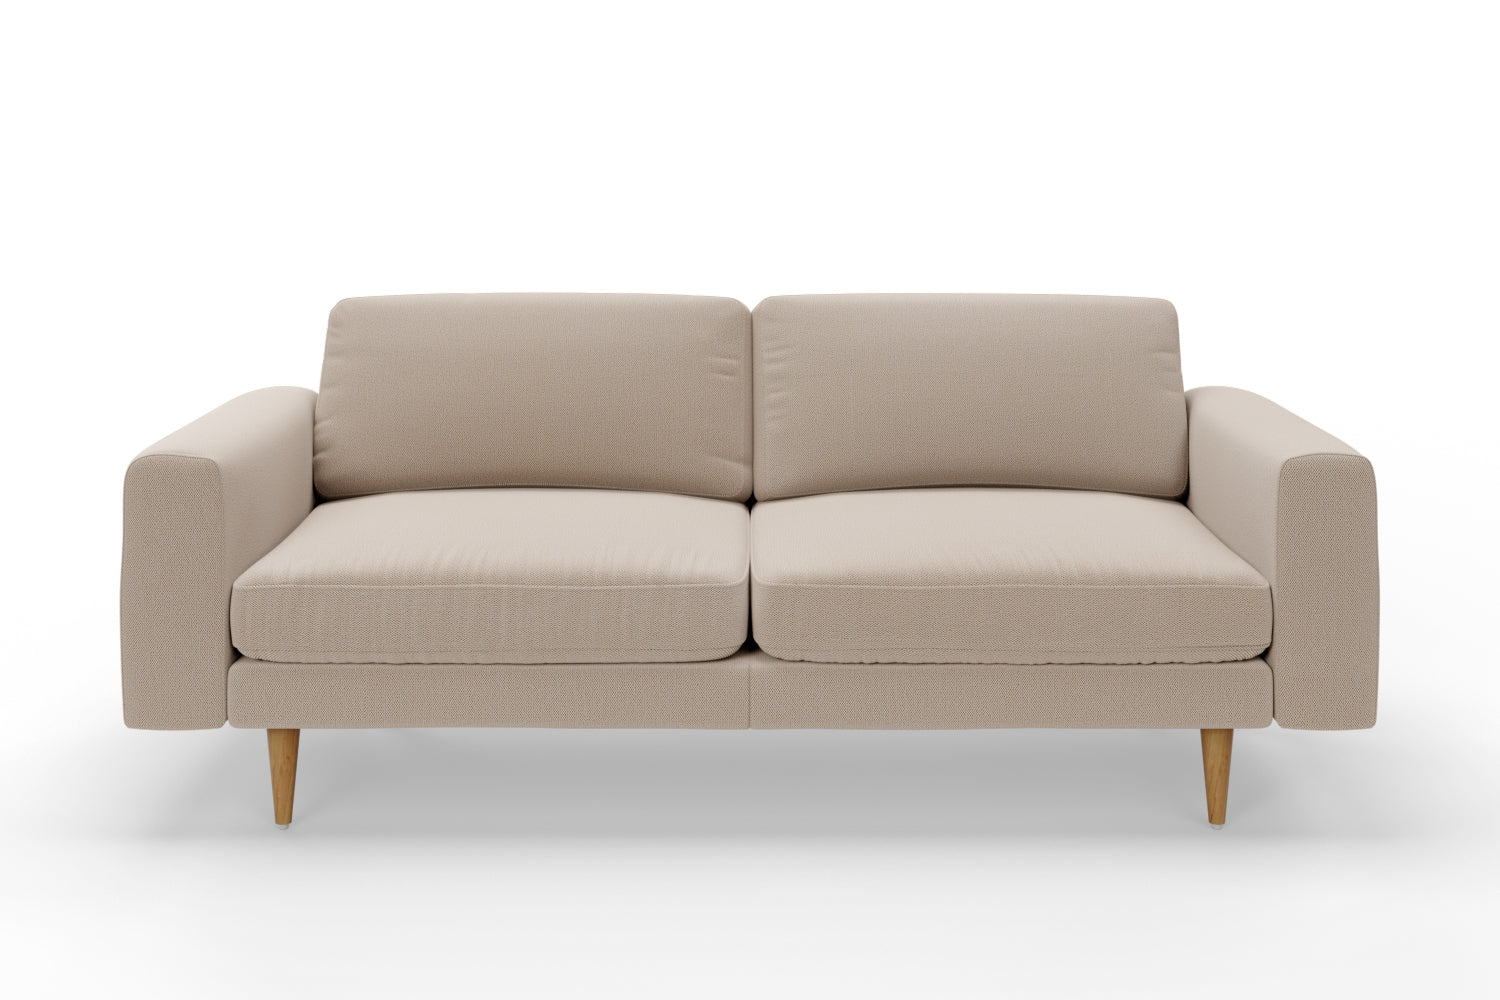 SNUG | The Big Chill 3 Seater Sofa in Oatmeal variant_40414878859312